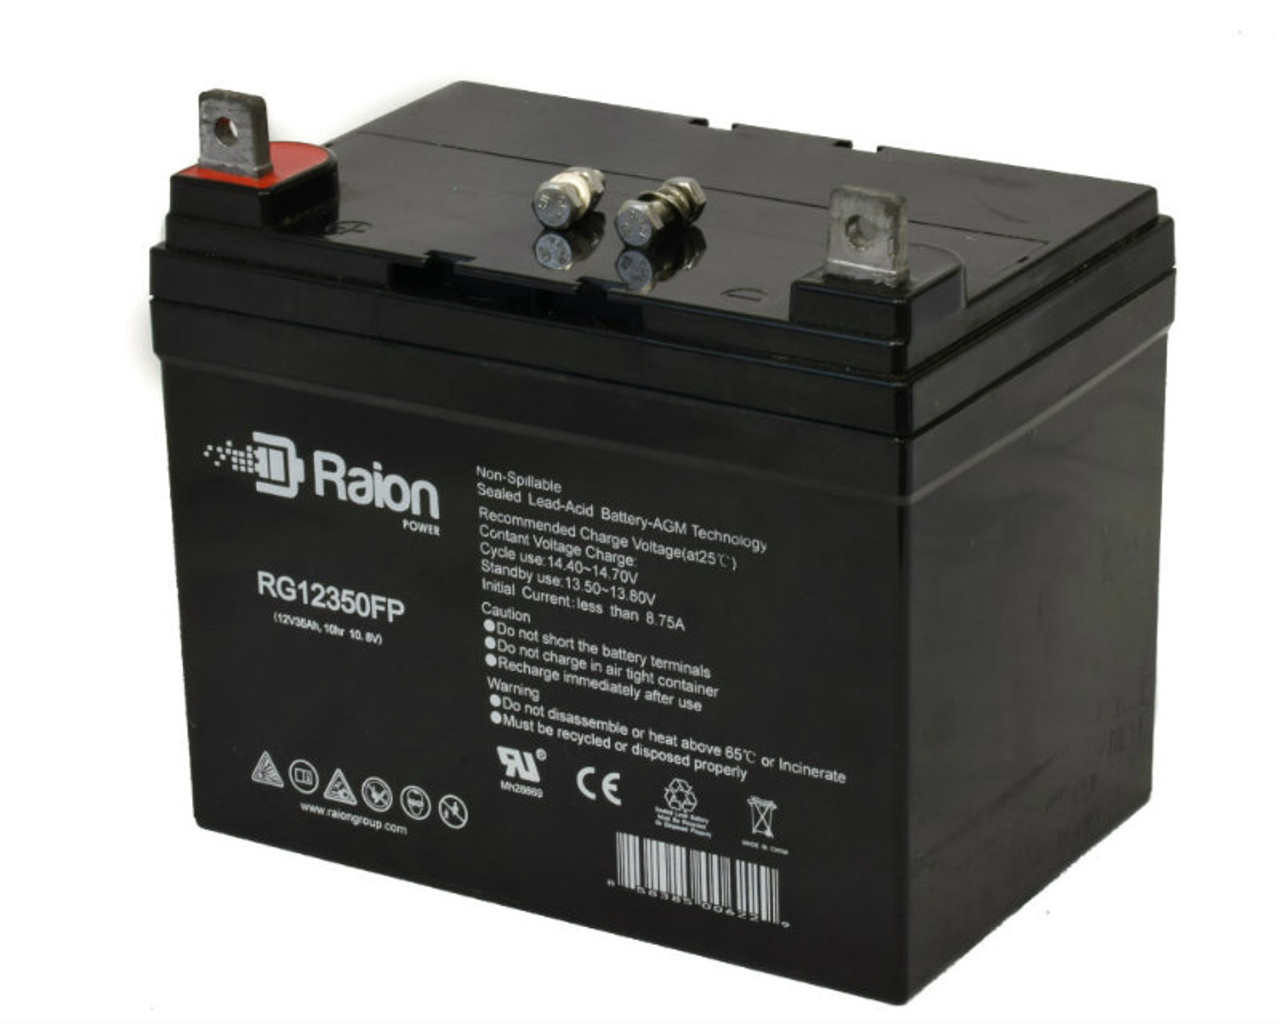 Raion Power Replacement 12V 35Ah RG12350FP Battery for Sigmas SP12-35